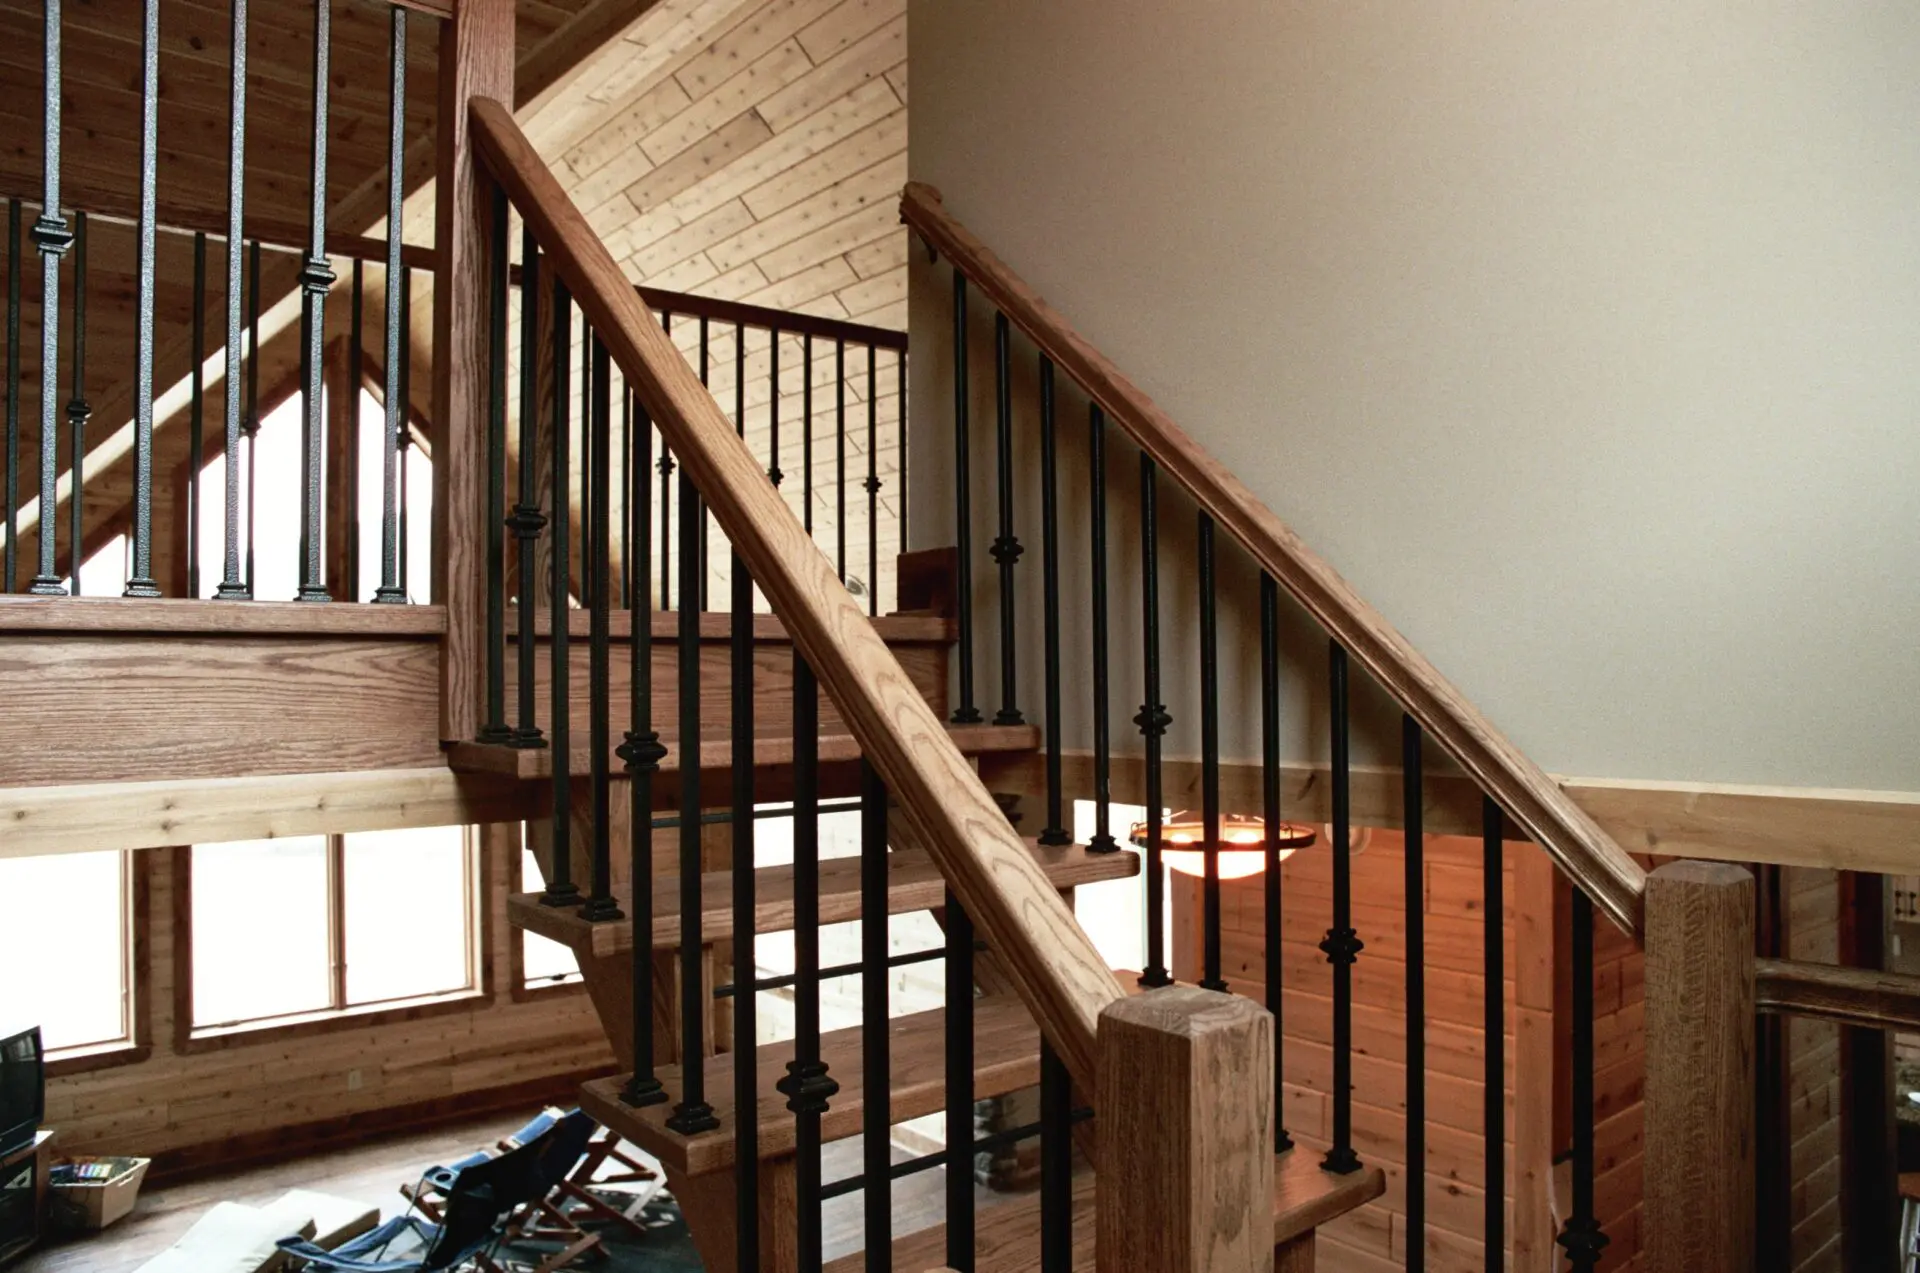 Plank Stair Made Up Of Wooden Material